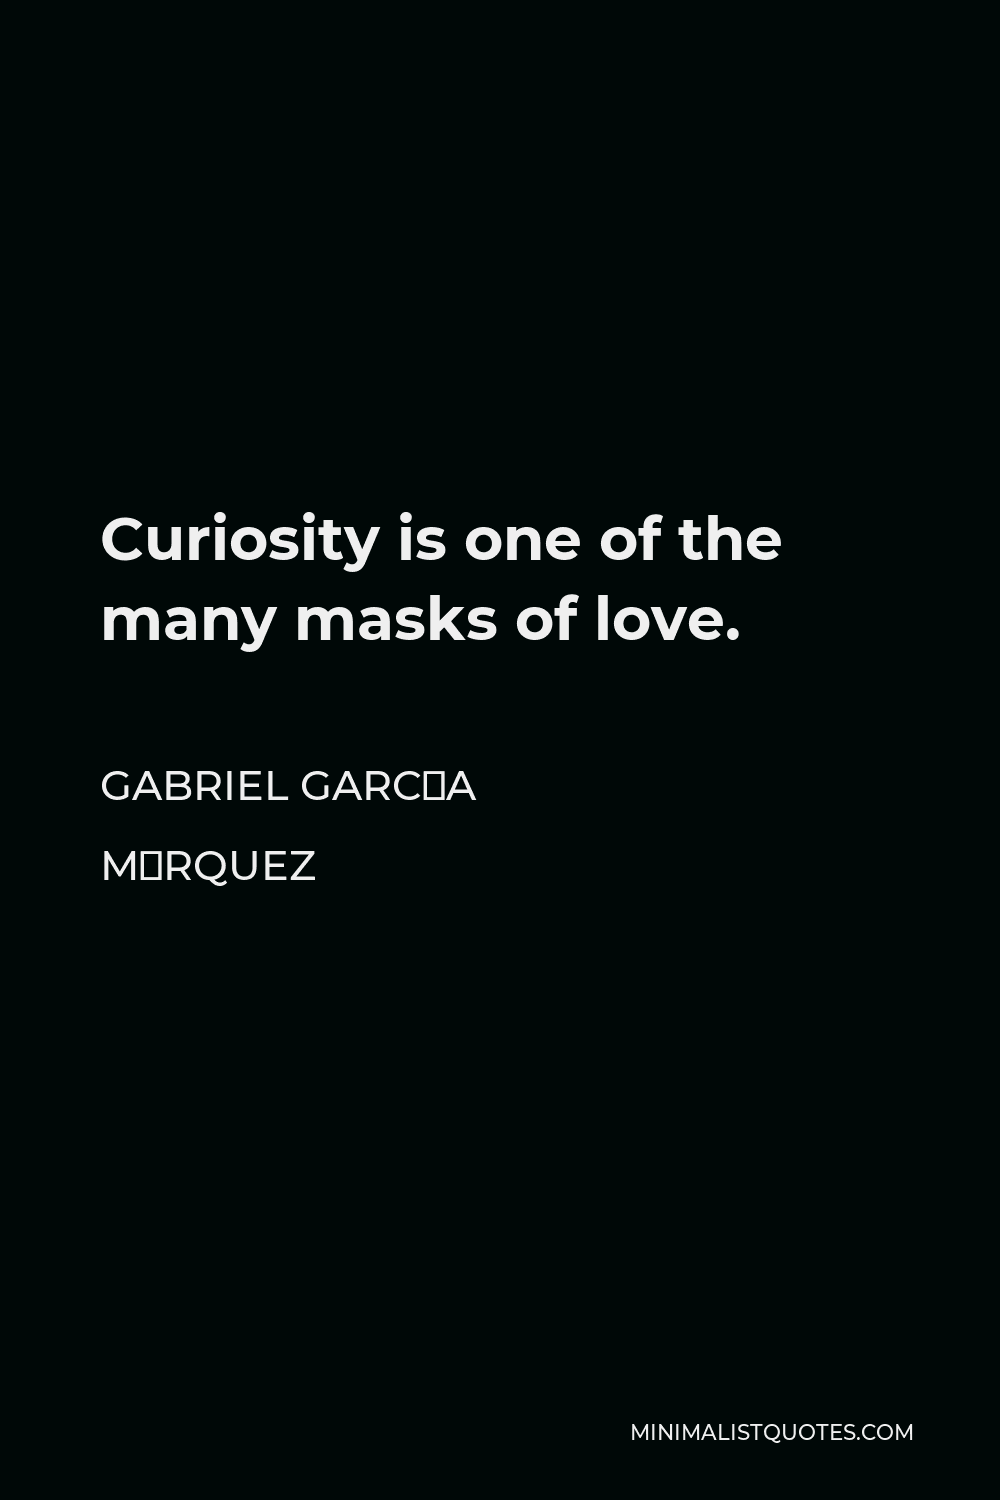 Gabriel García Márquez Quote - Curiosity is one of the many masks of love.